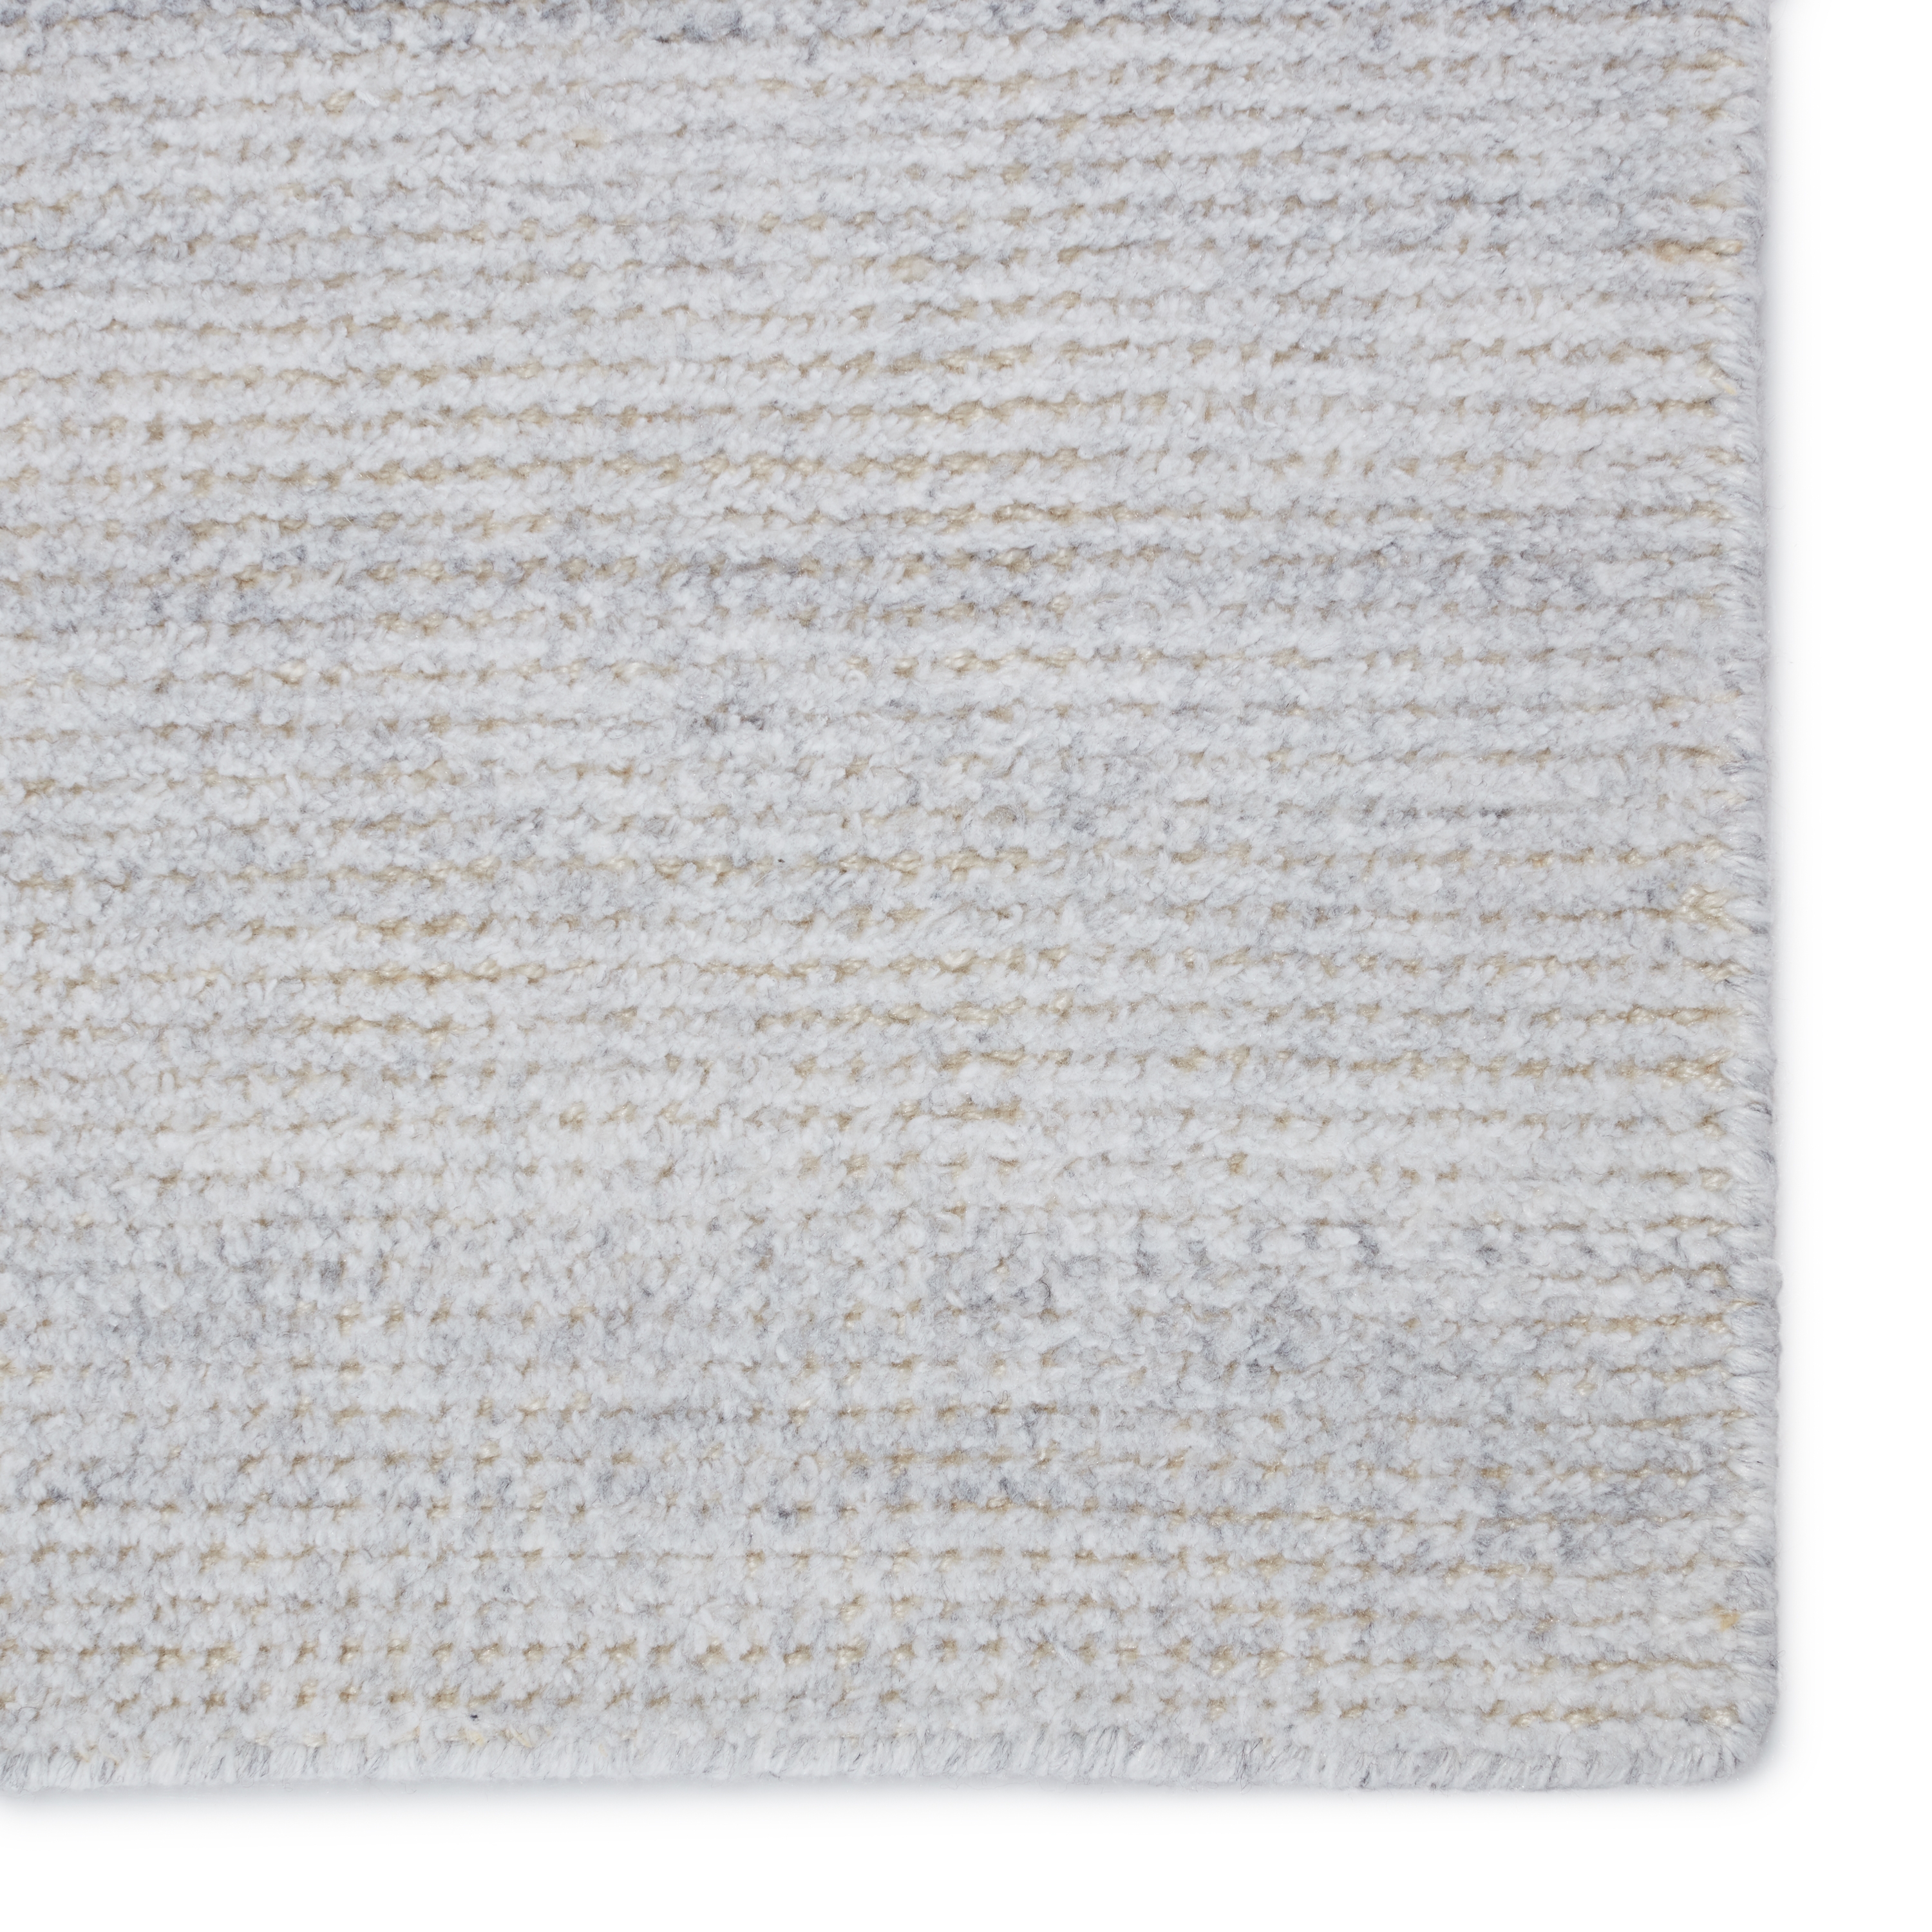 Limon Indoor/ Outdoor Solid White Area Rug. 7'10" X 10'10" - Image 3